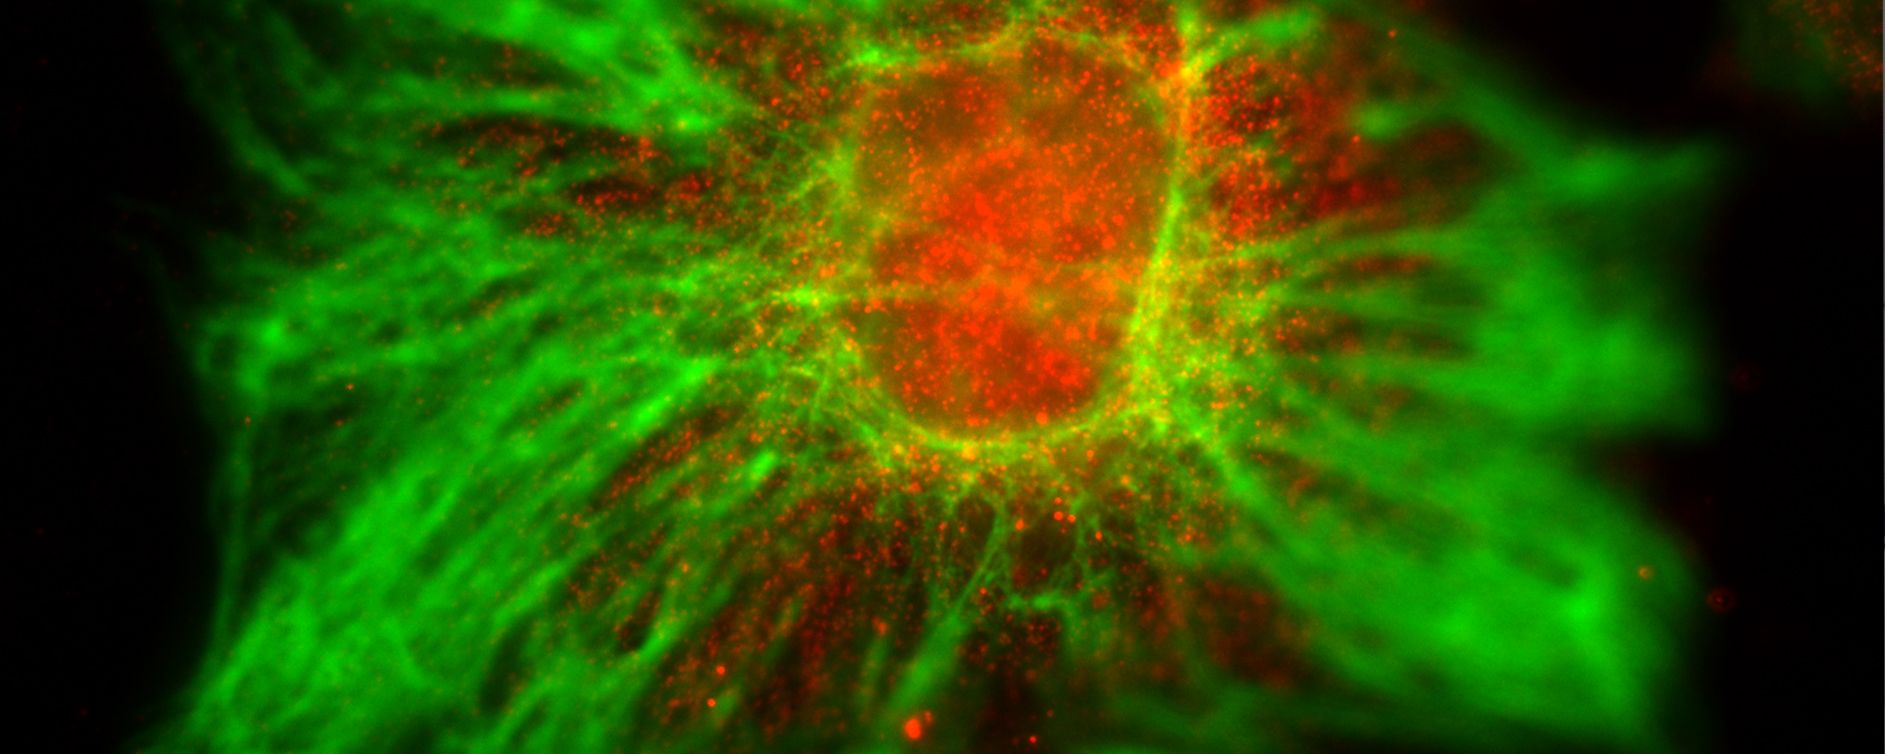 Fluorescent super resolved image of neuronal cells